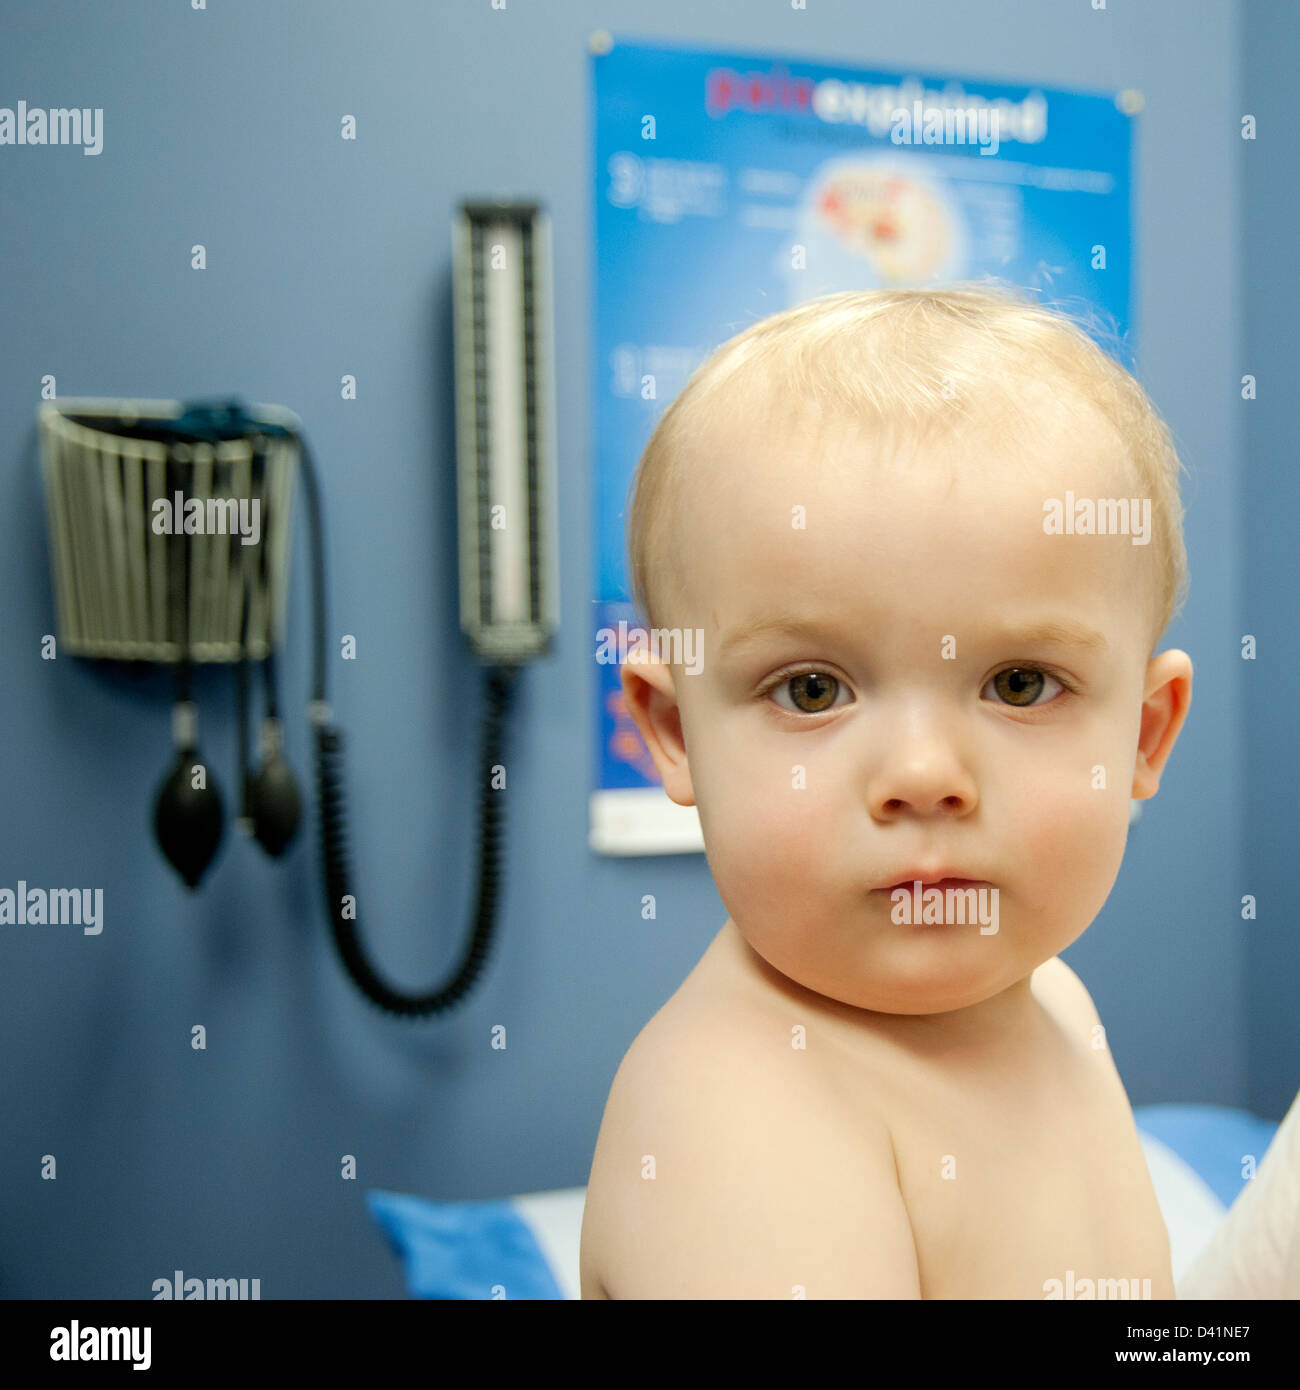 Baby in doctor's office for medical check up Stock Photo